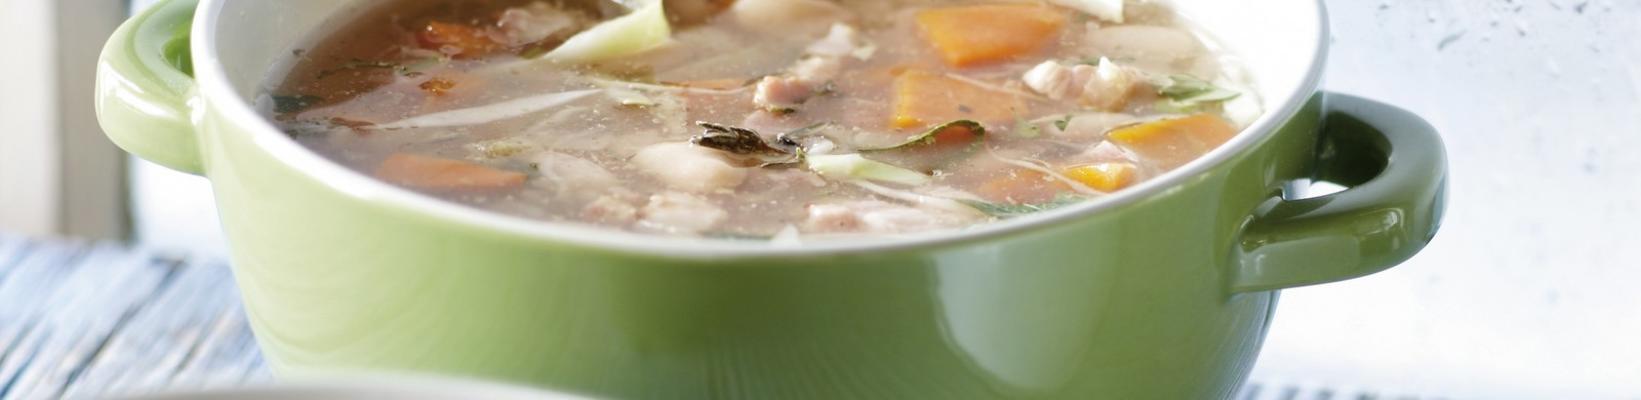 winter vegetable soup with bacon and beans